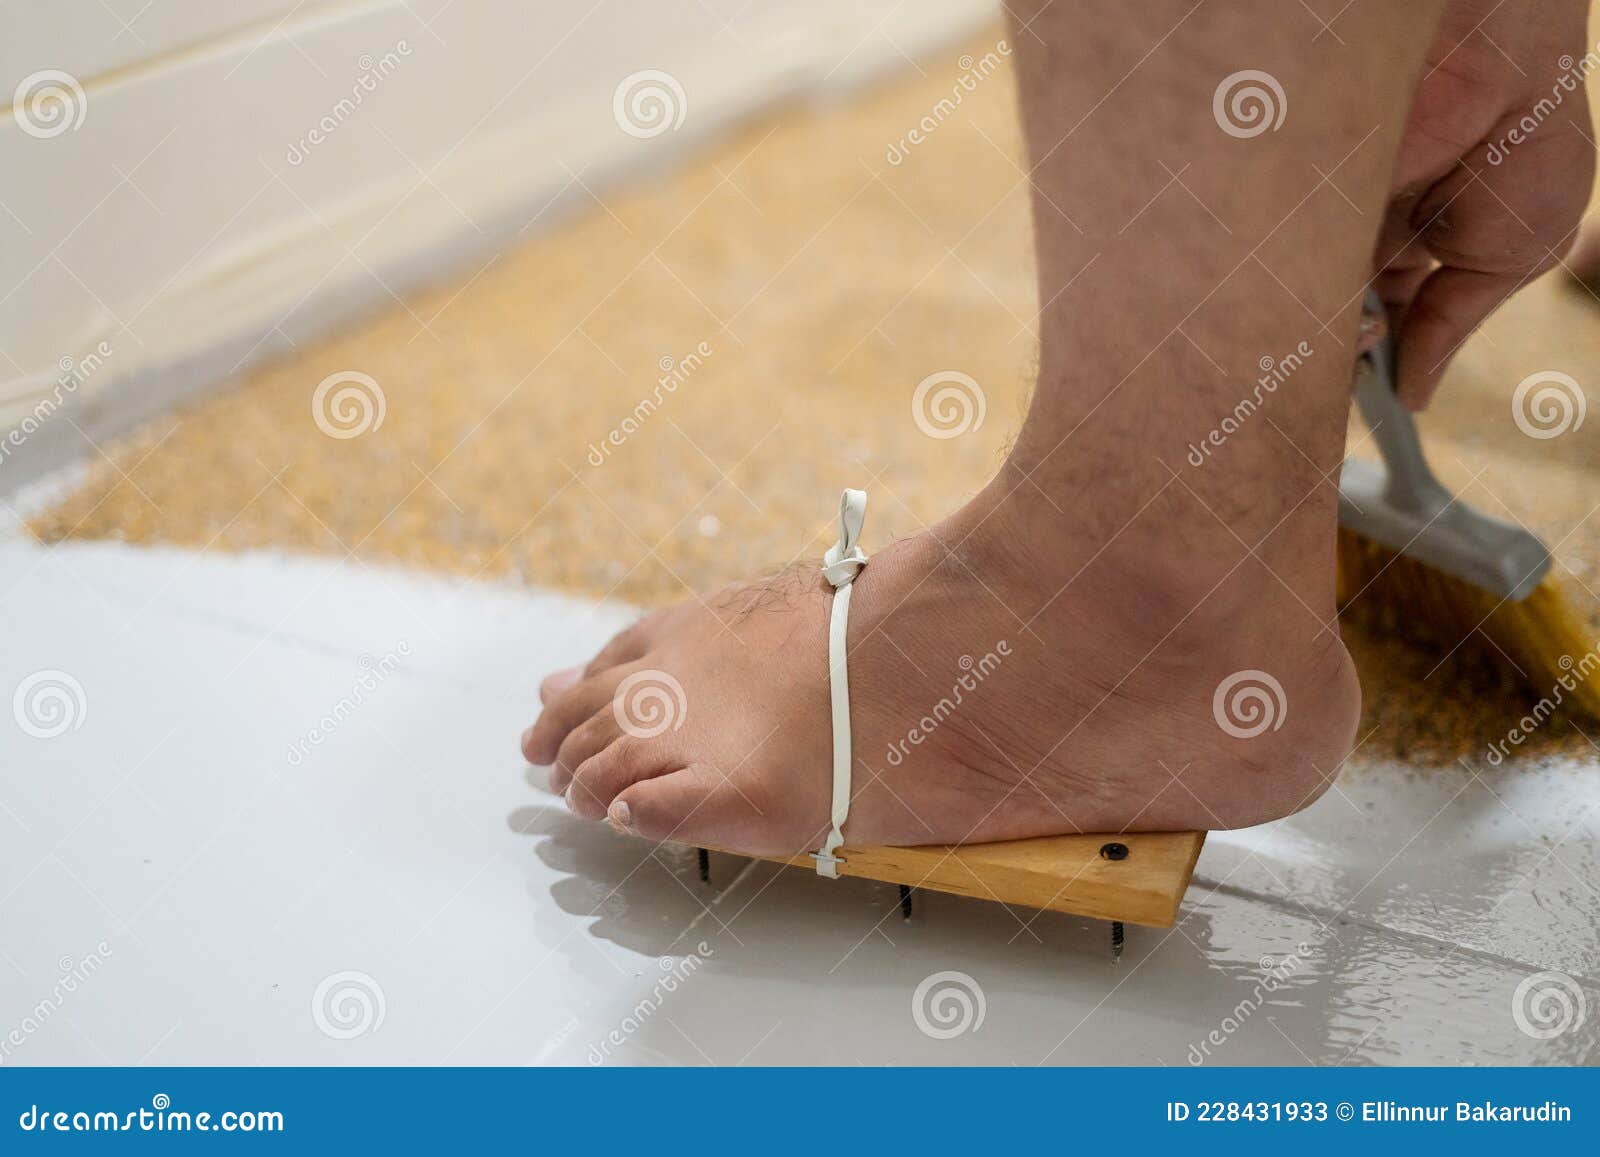 Feet Wearing Painters' Wooden Shoes Nails Self Leveling Epoxy